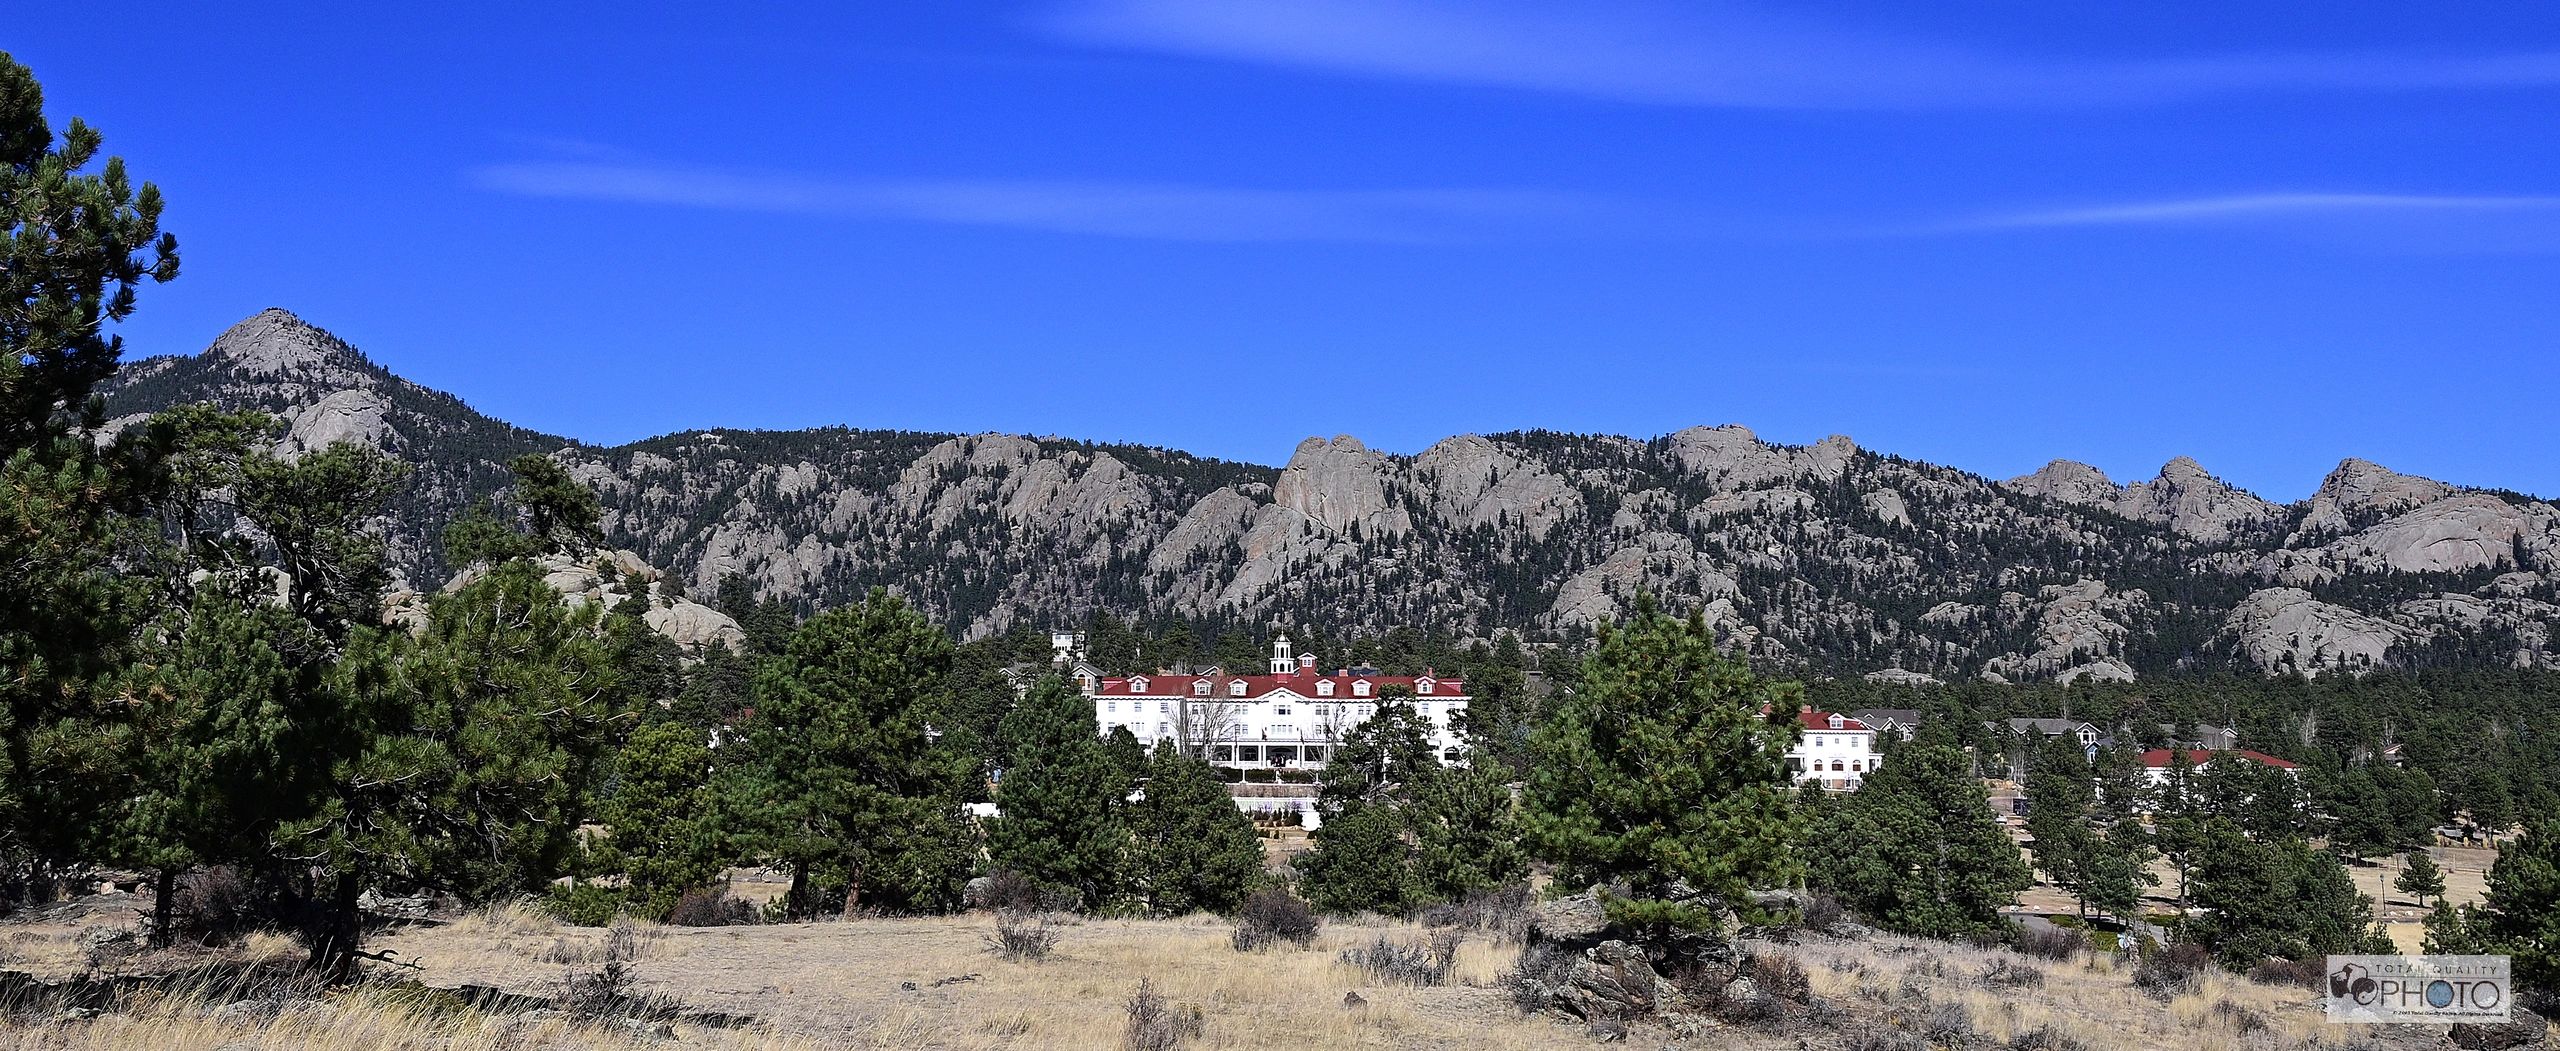 The Stanley Hotel Complex Panorama